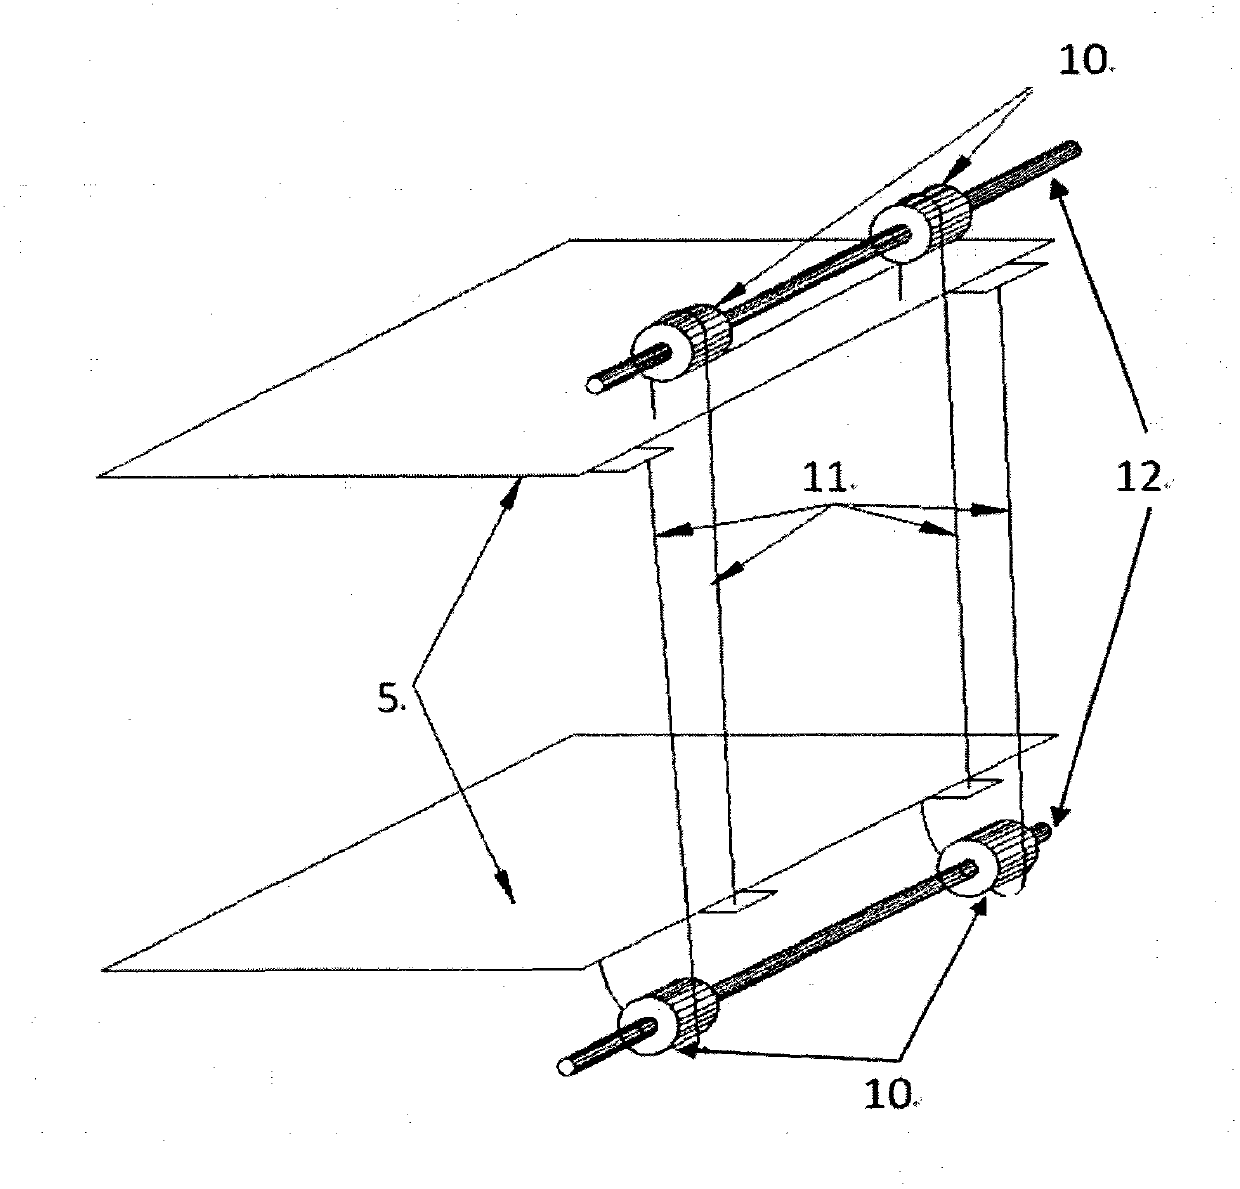 Tilting device for ingot casting with rectangular section